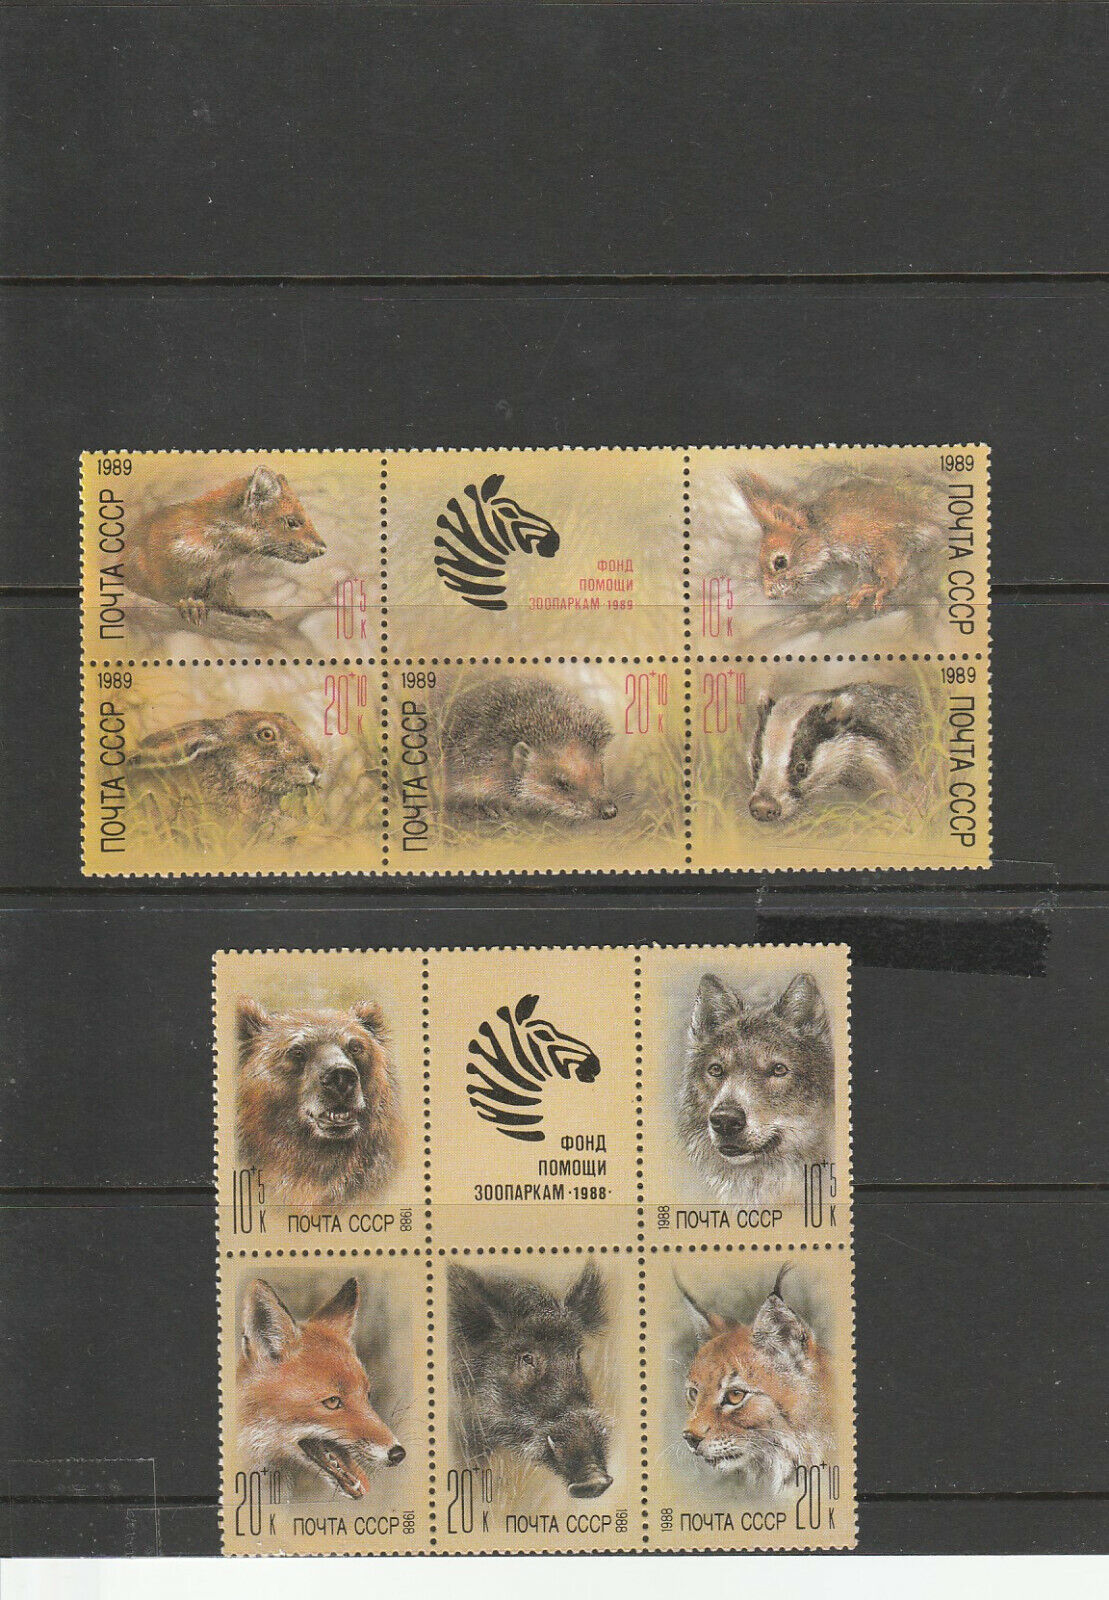  ANIMALS AND BIRDS IN ZOOS 1984 -1991 4 SETS OF STAMPS Без бренда